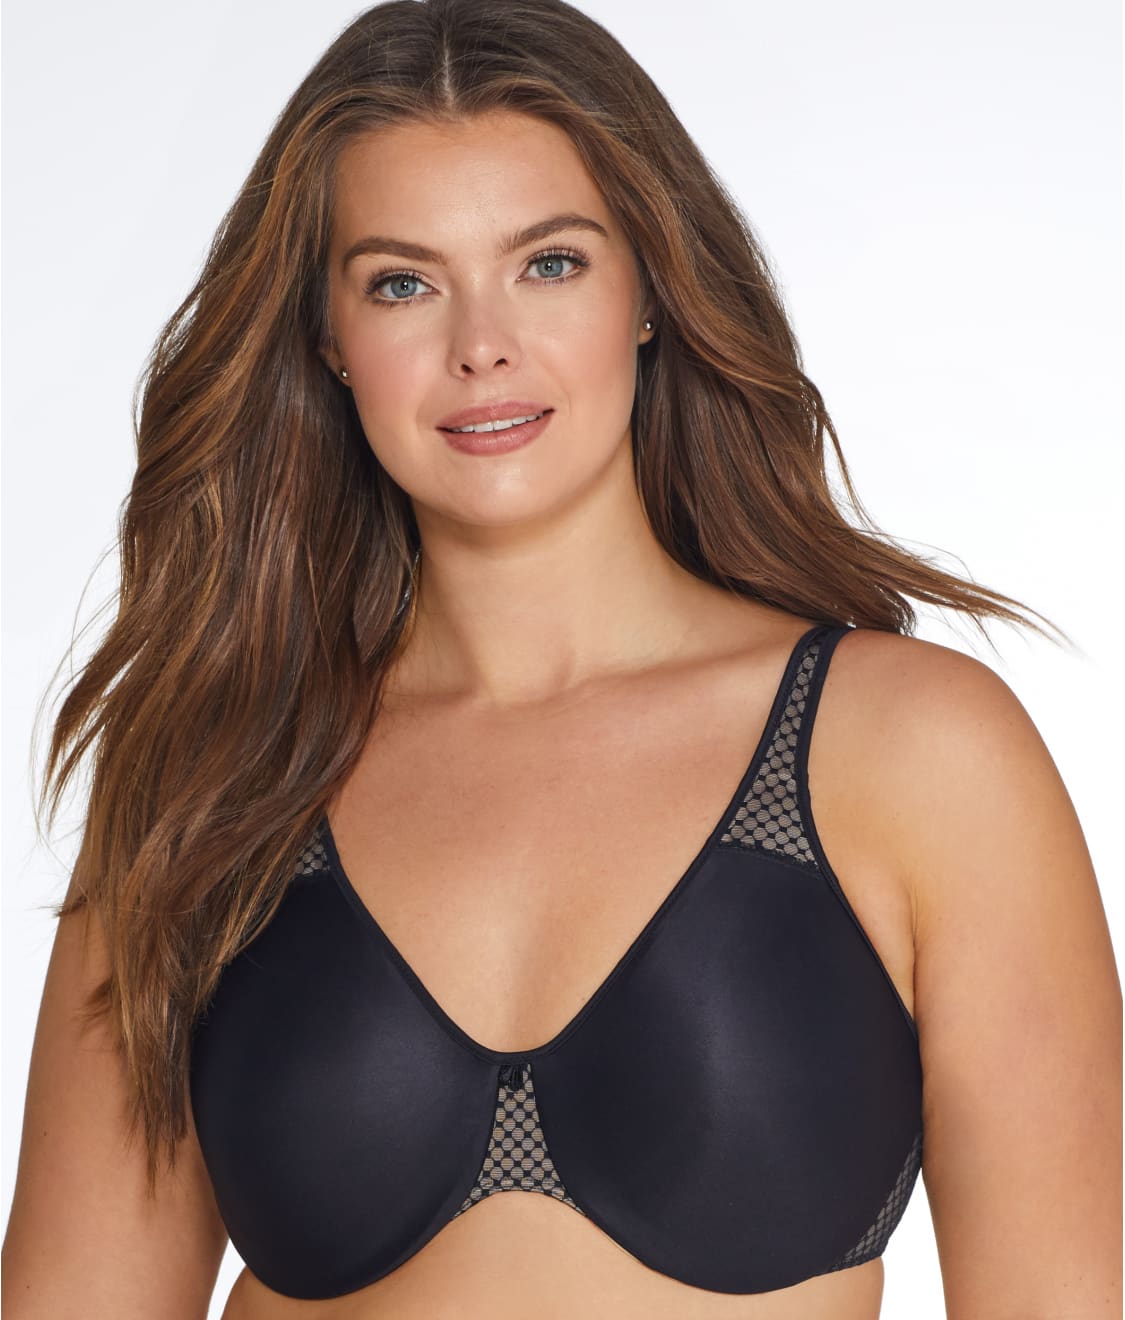 Bali Womens Passion for Comfort Minimizer Bra, Hidden Underwire, Seamless  Cups, Full-Coverage